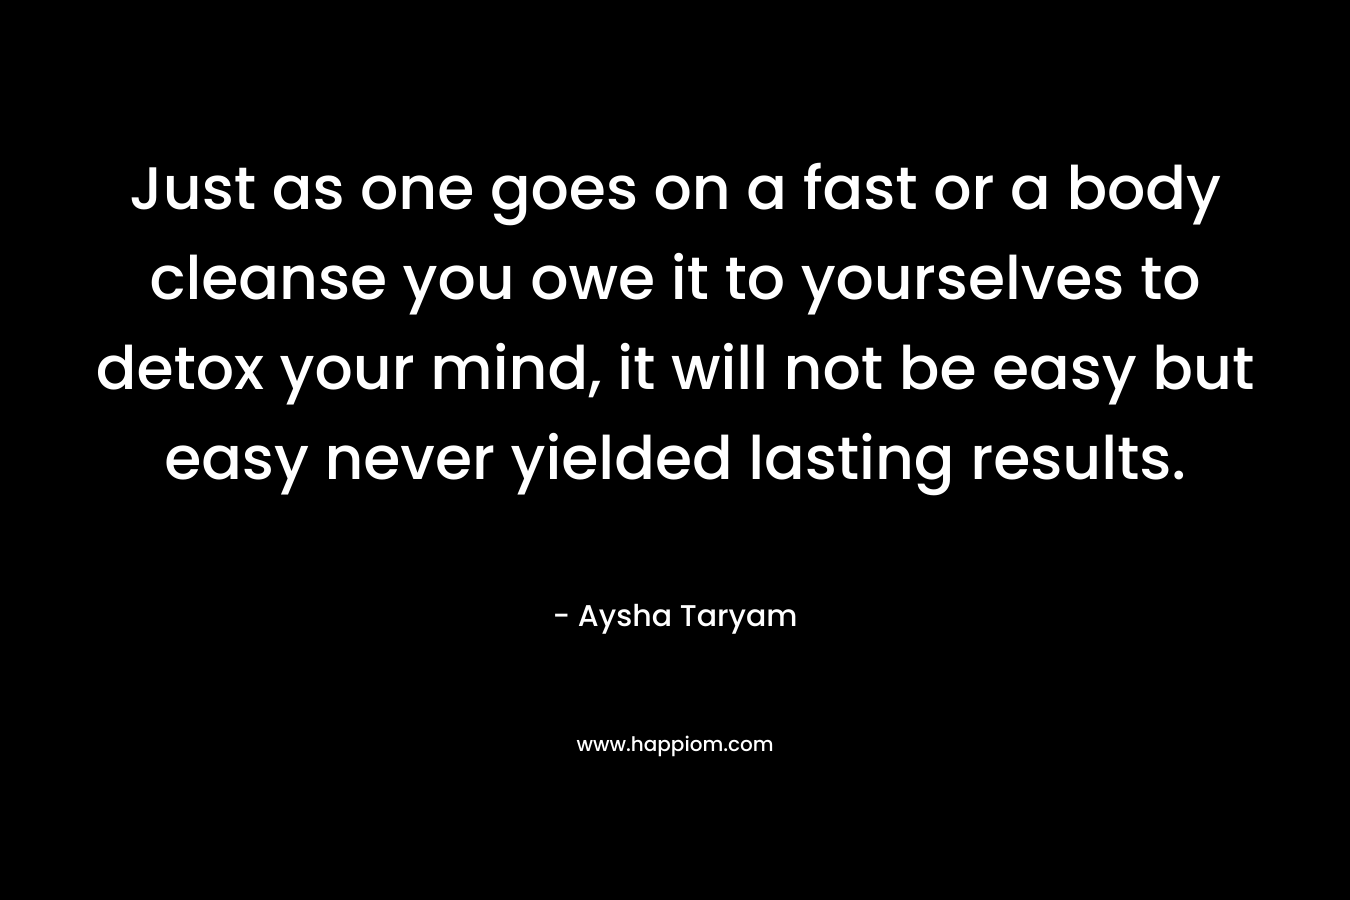 Just as one goes on a fast or a body cleanse you owe it to yourselves to detox your mind, it will not be easy but easy never yielded lasting results. – Aysha Taryam